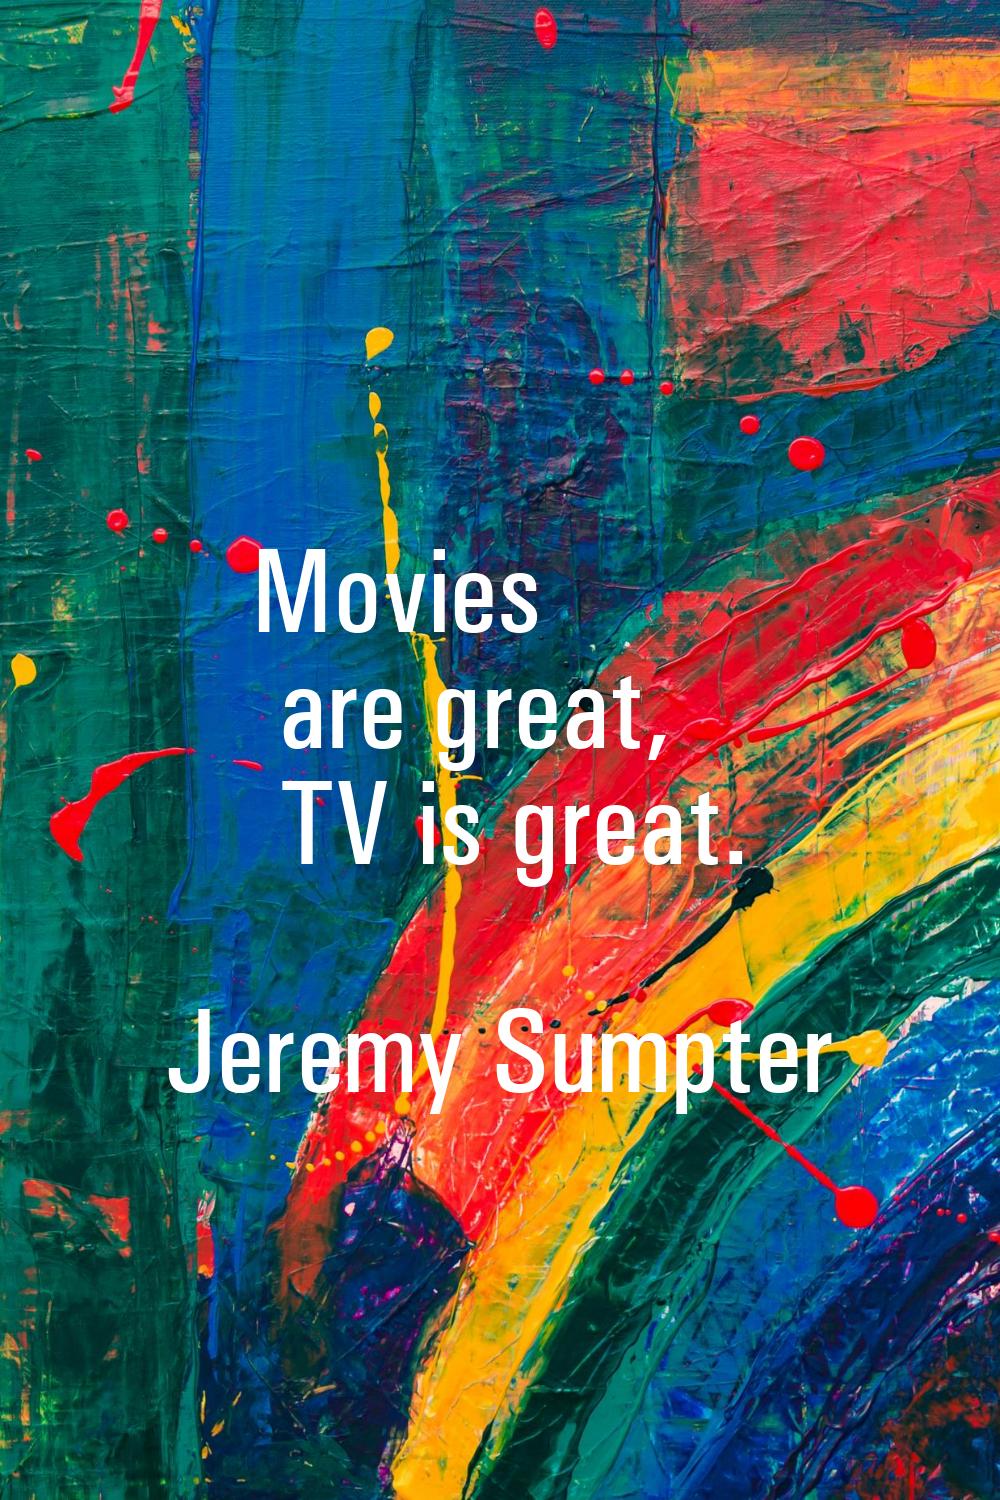 Movies are great, TV is great.